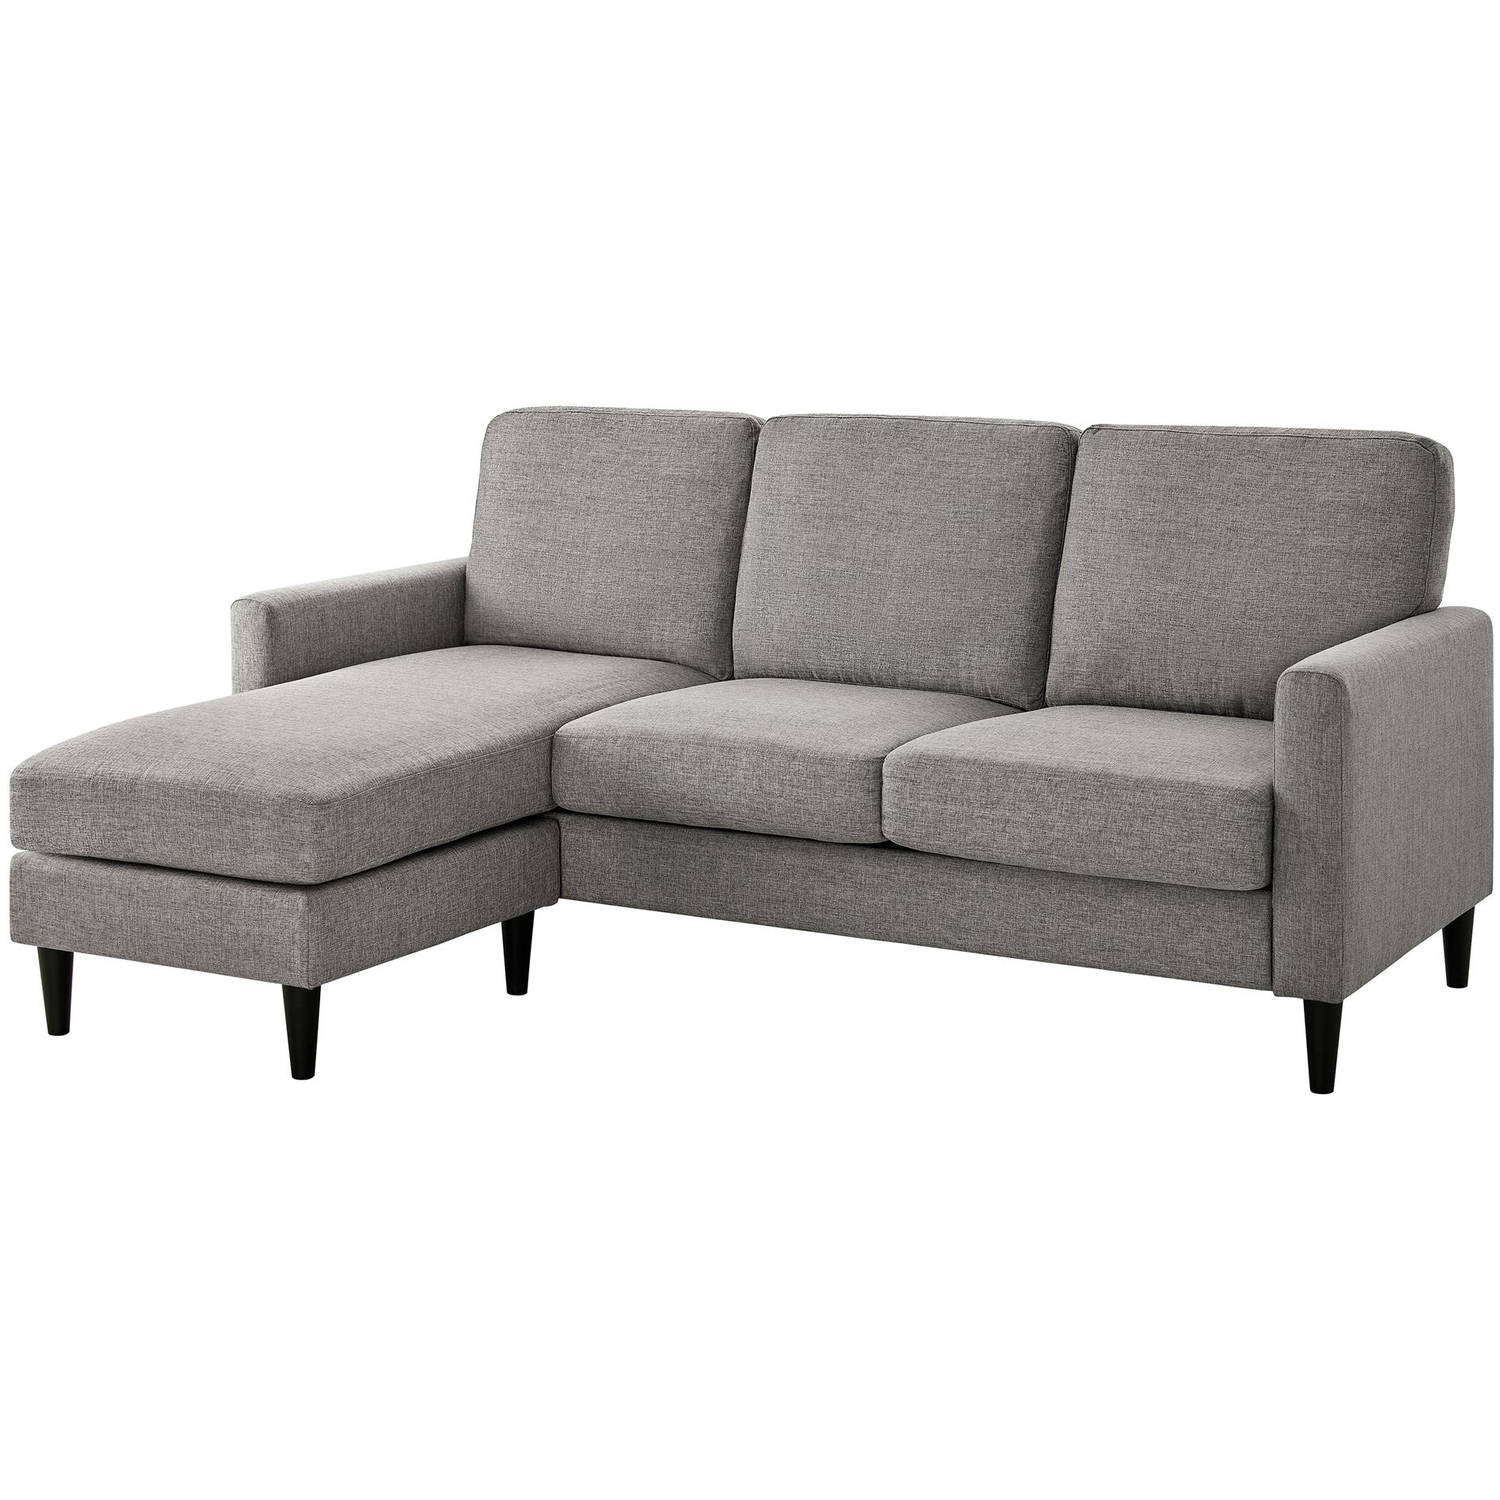 Dorel Living Kaci Reversible Contemporary Upholstered Sectional, Gray - image 3 of 10